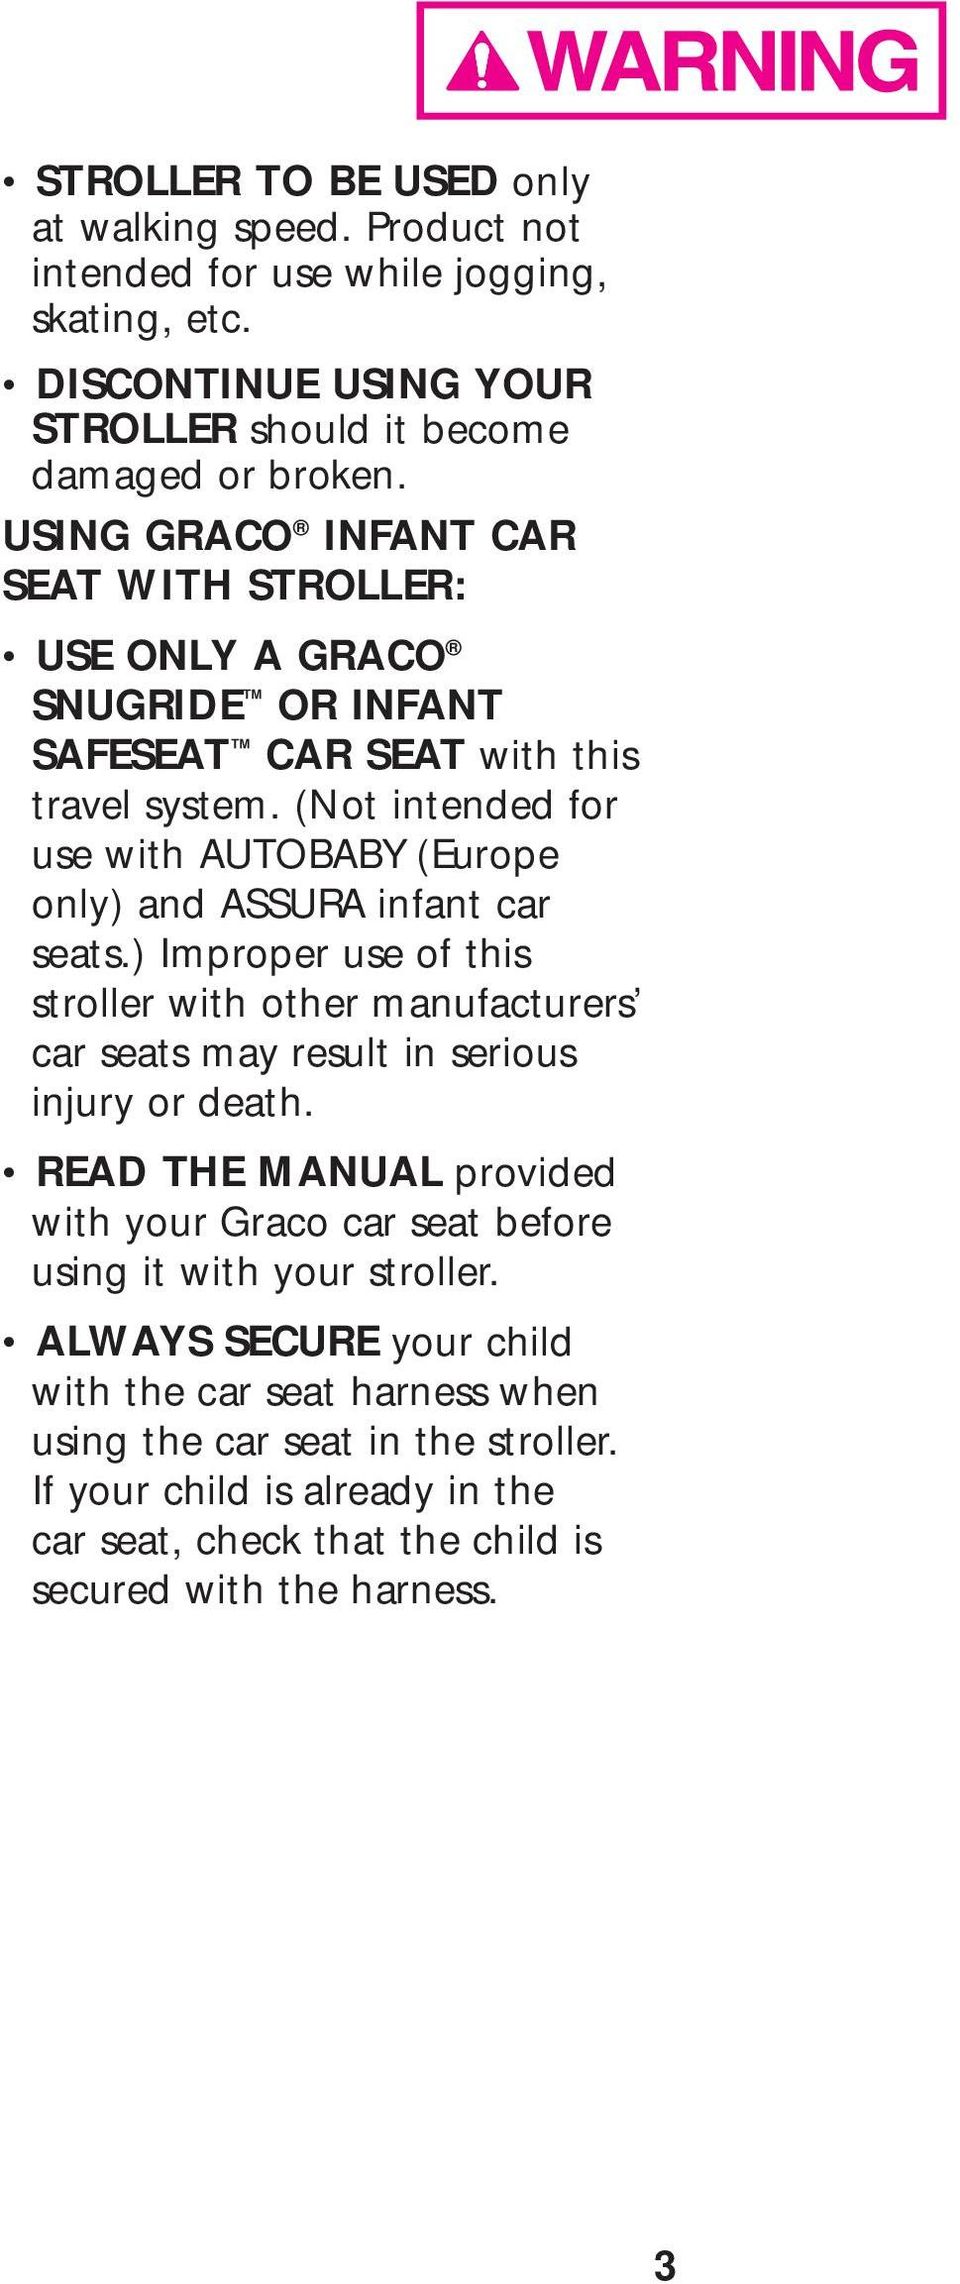 (Not intended for use with AUTOBABY (Europe only) and ASSURA infant car seats.) Improper use of this stroller with other manufacturers car seats may result in serious injury or death.